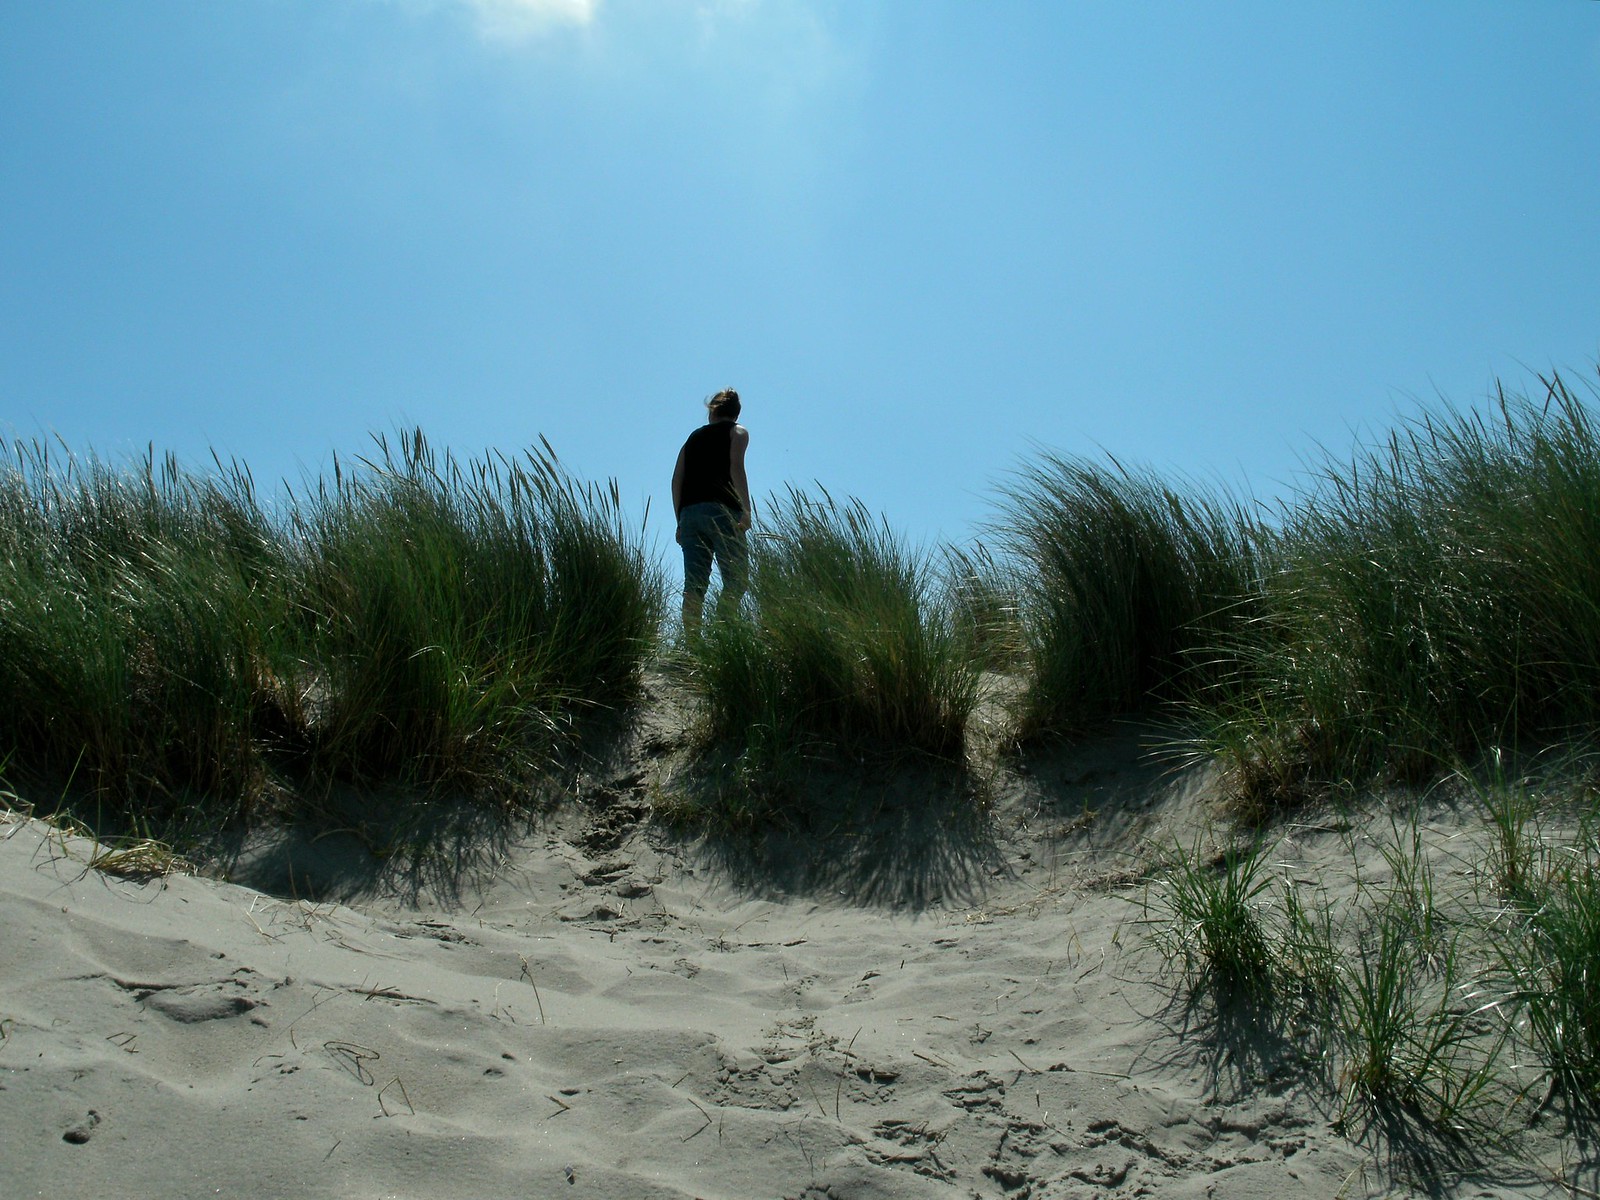 A silhouette of a girl in-between the beach vegetation.